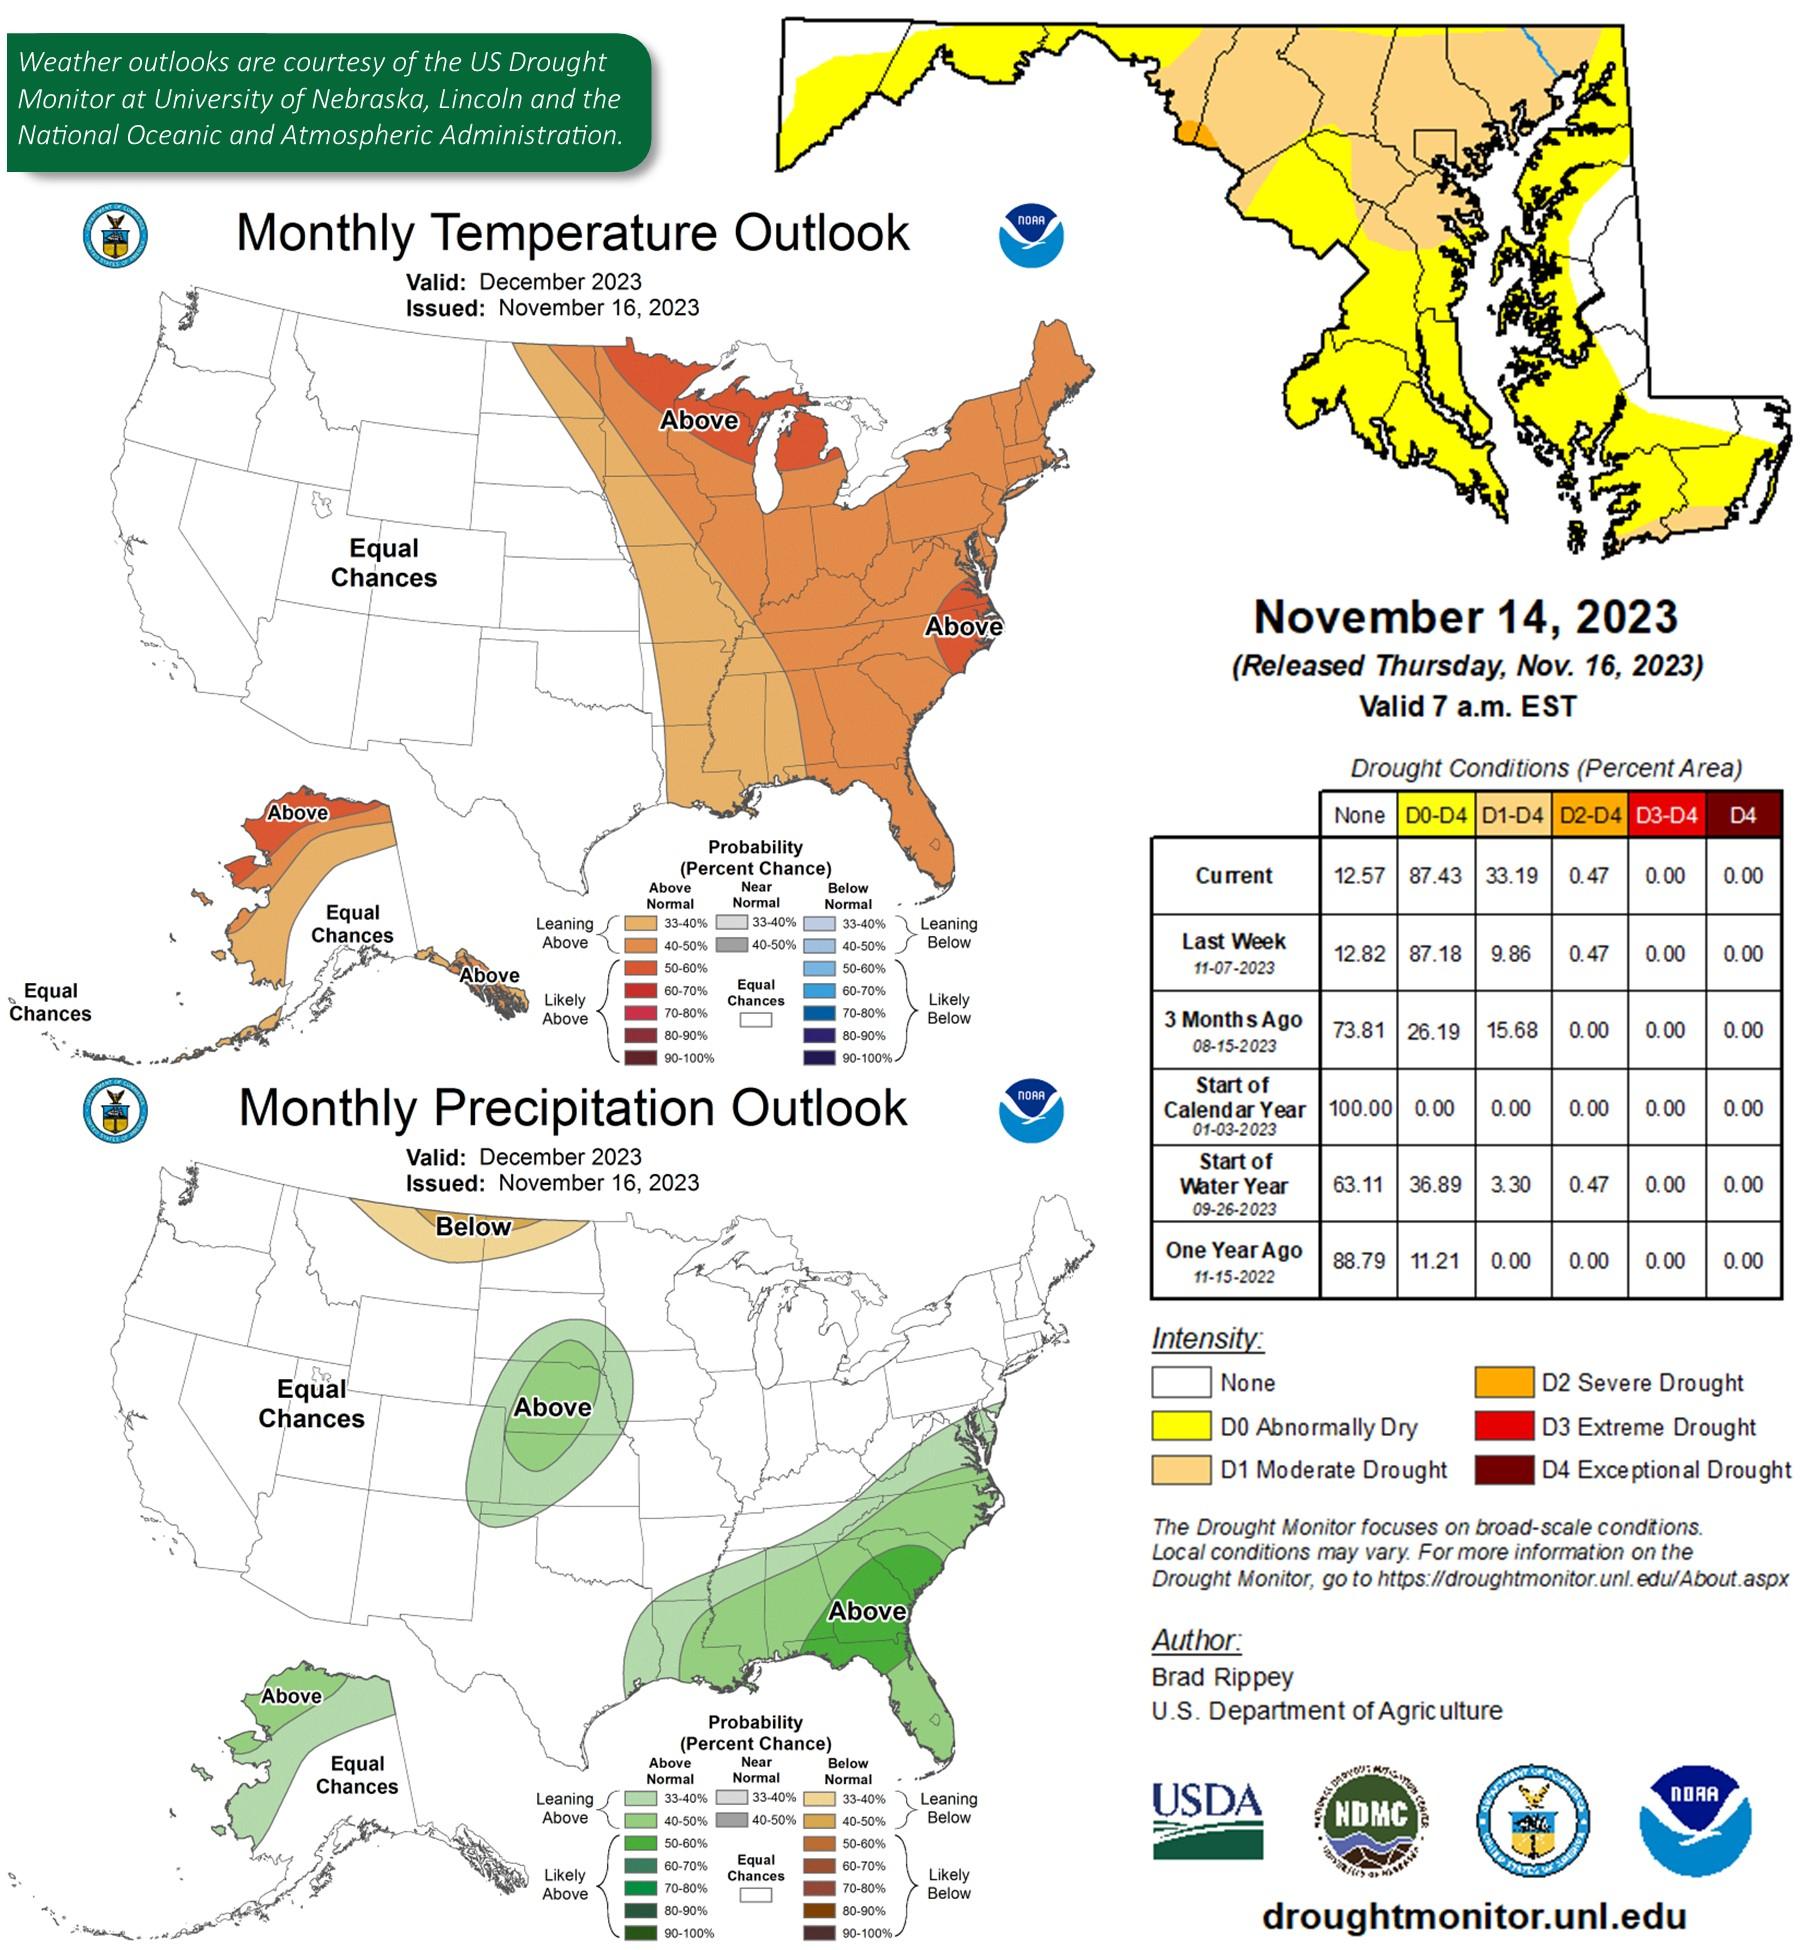 Maryland Weather Outlook forcast of temerature, precipitation, drought conditions.